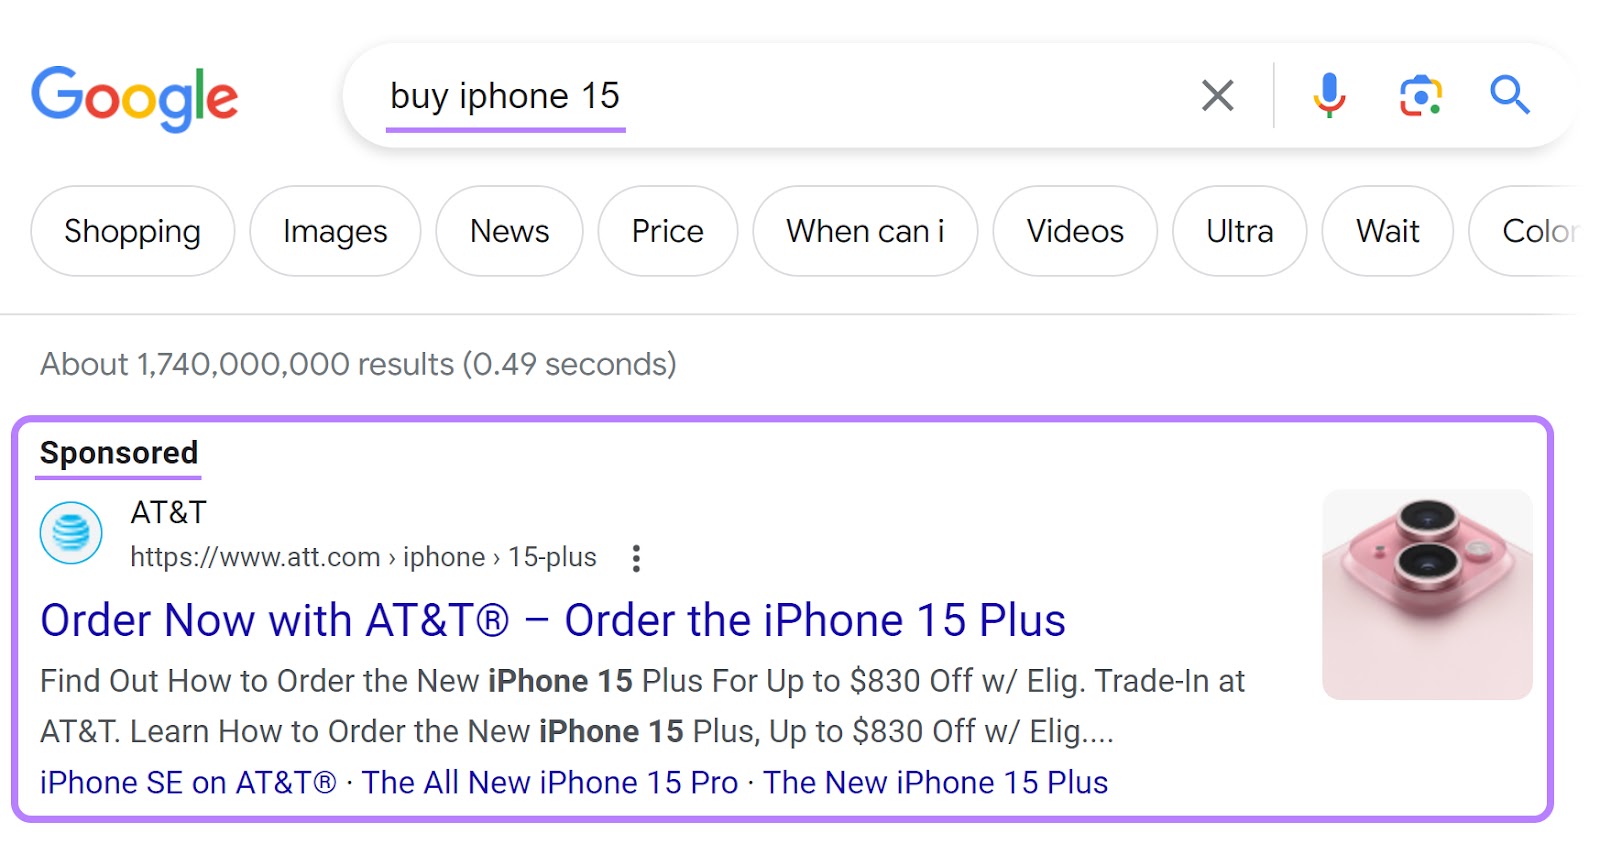 pay-per-click ad for "buy iphone 15" search on Google